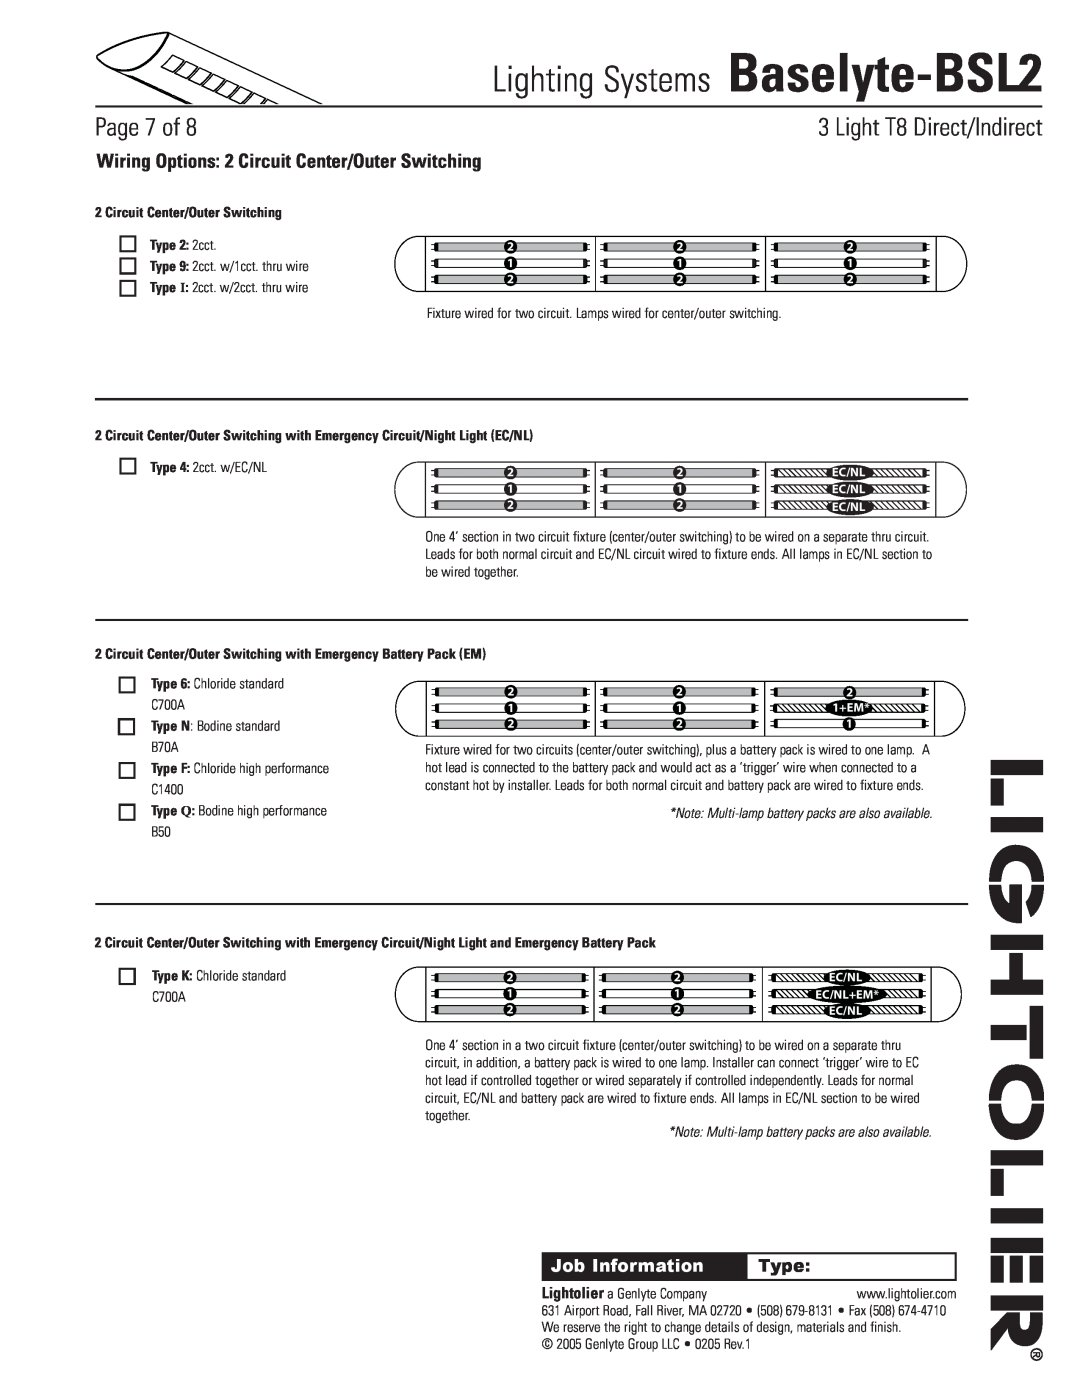 Lightolier Baselyte-BSL2 Wiring Options 2 Circuit Center/Outer Switching, Circuit Center/Outer Switching Type 2 2cct 